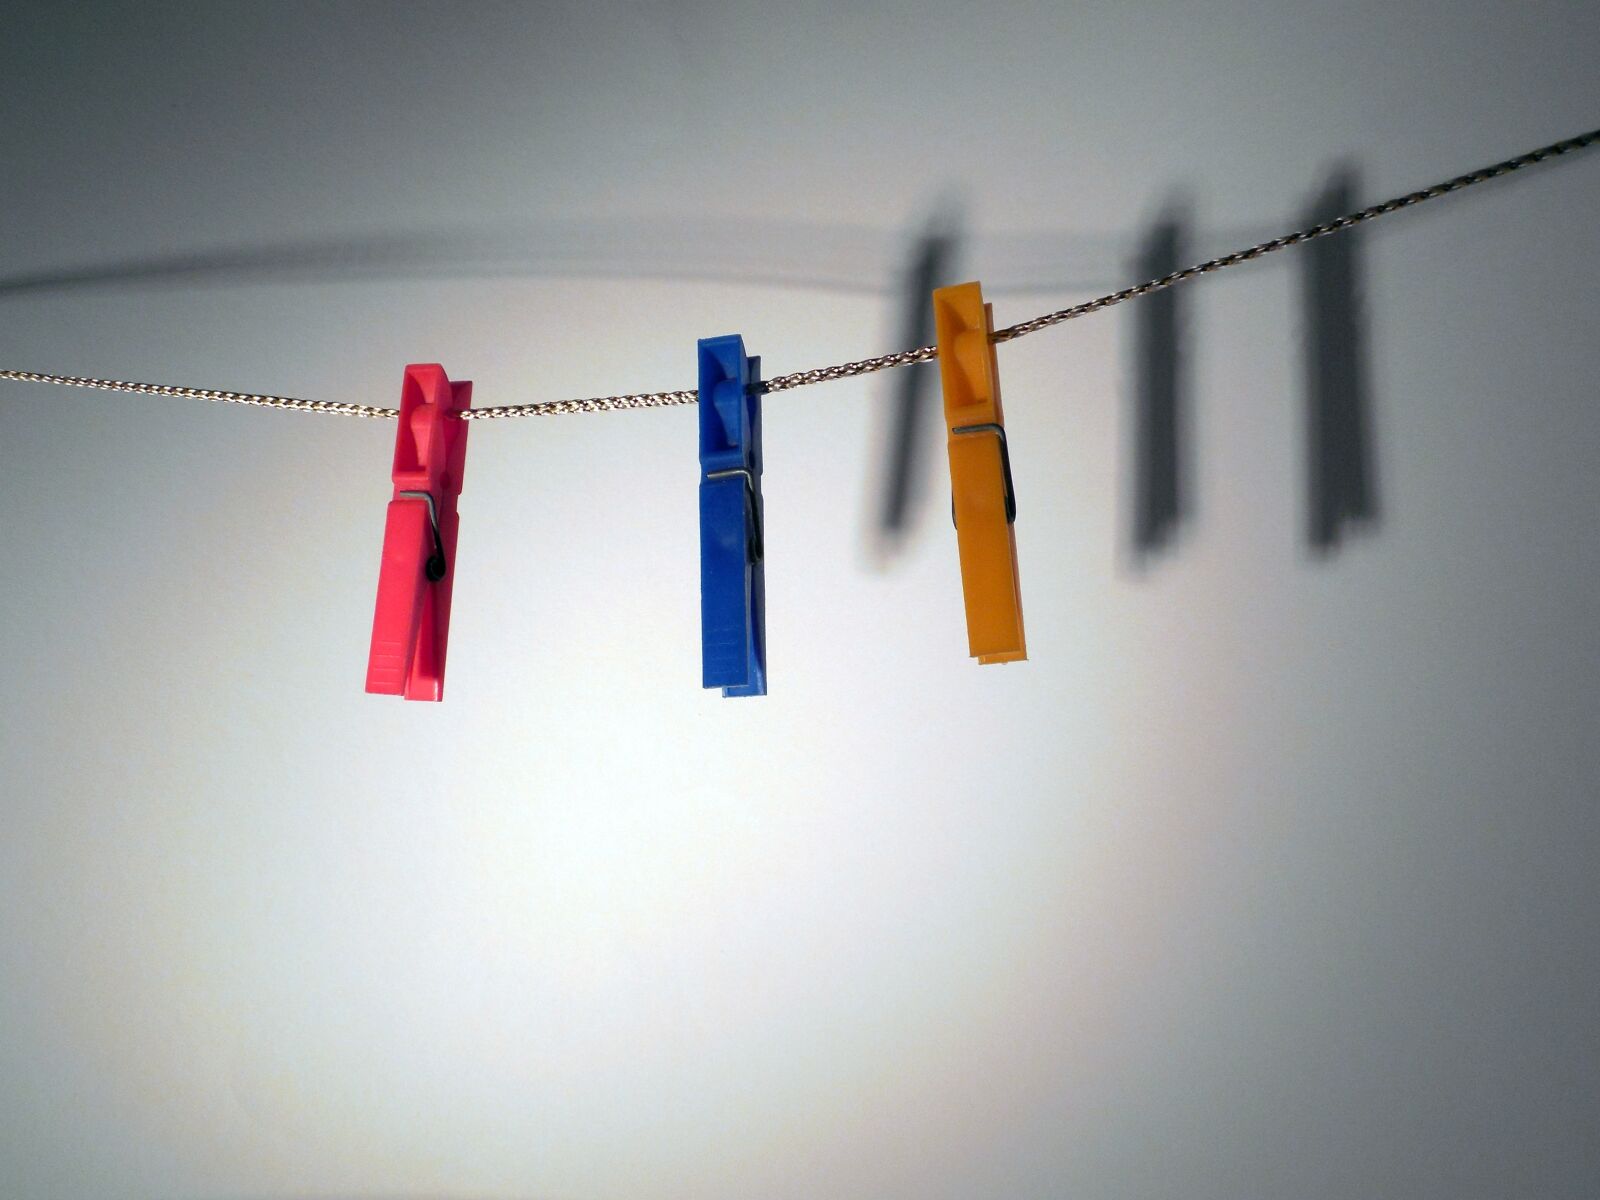 Nikon COOLPIX L620 sample photo. Clamp, clothespins, laundry photography